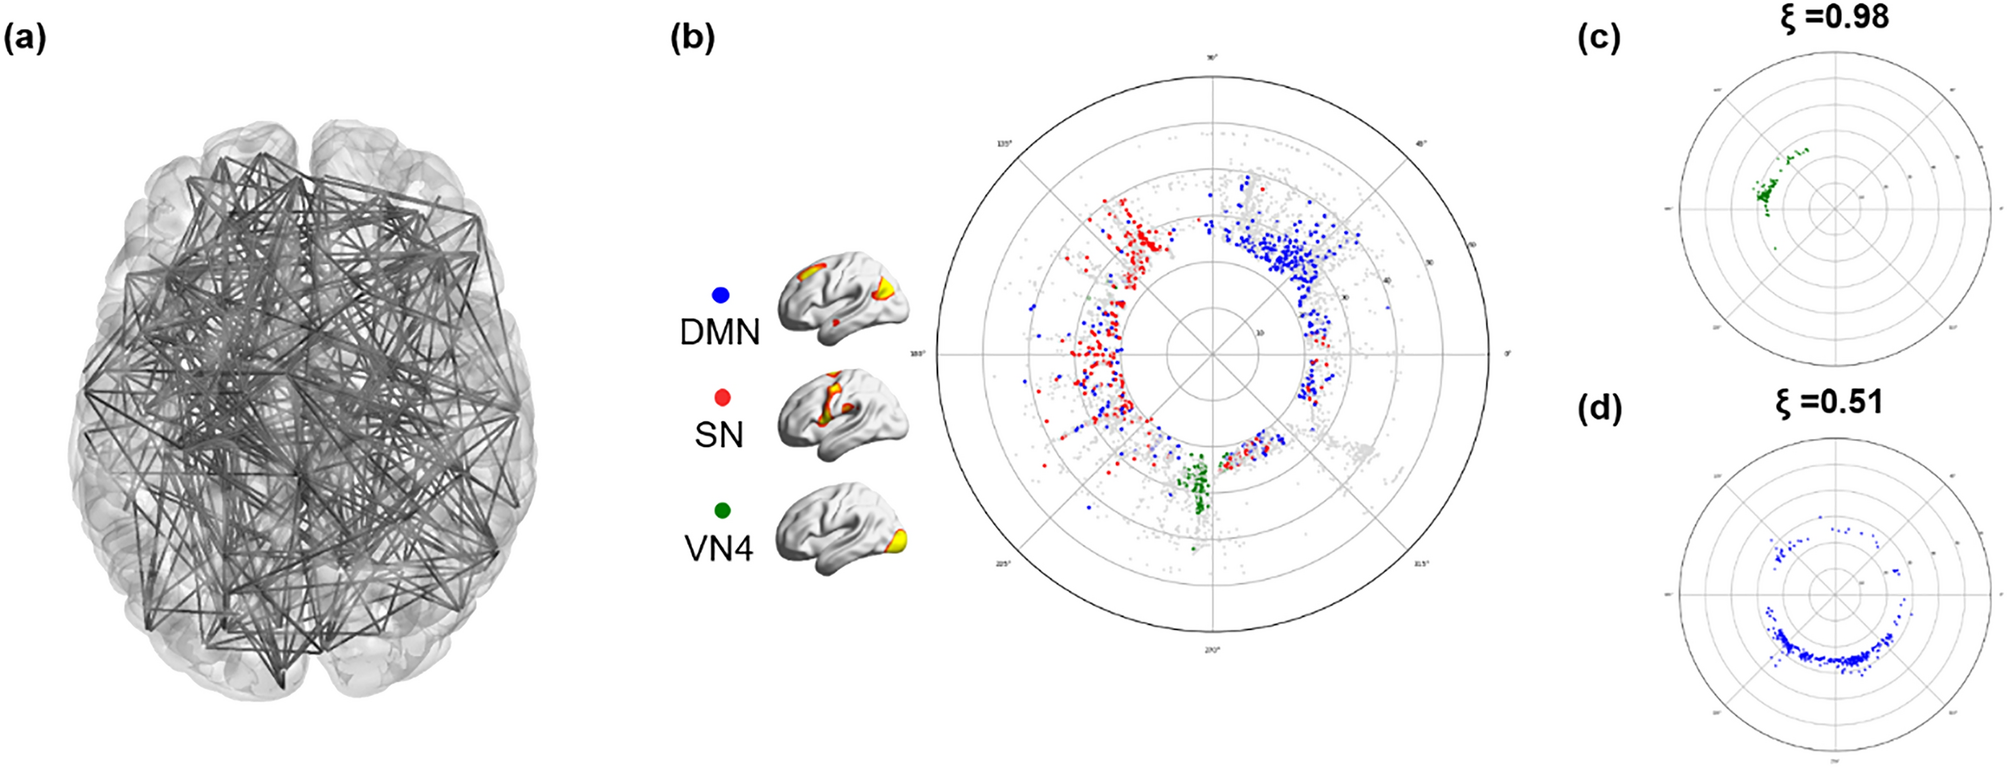 Characteristic functional cores revealed by hyperbolic disc embedding and  k-core percolation on resting-state fMRI | Scientific Reports